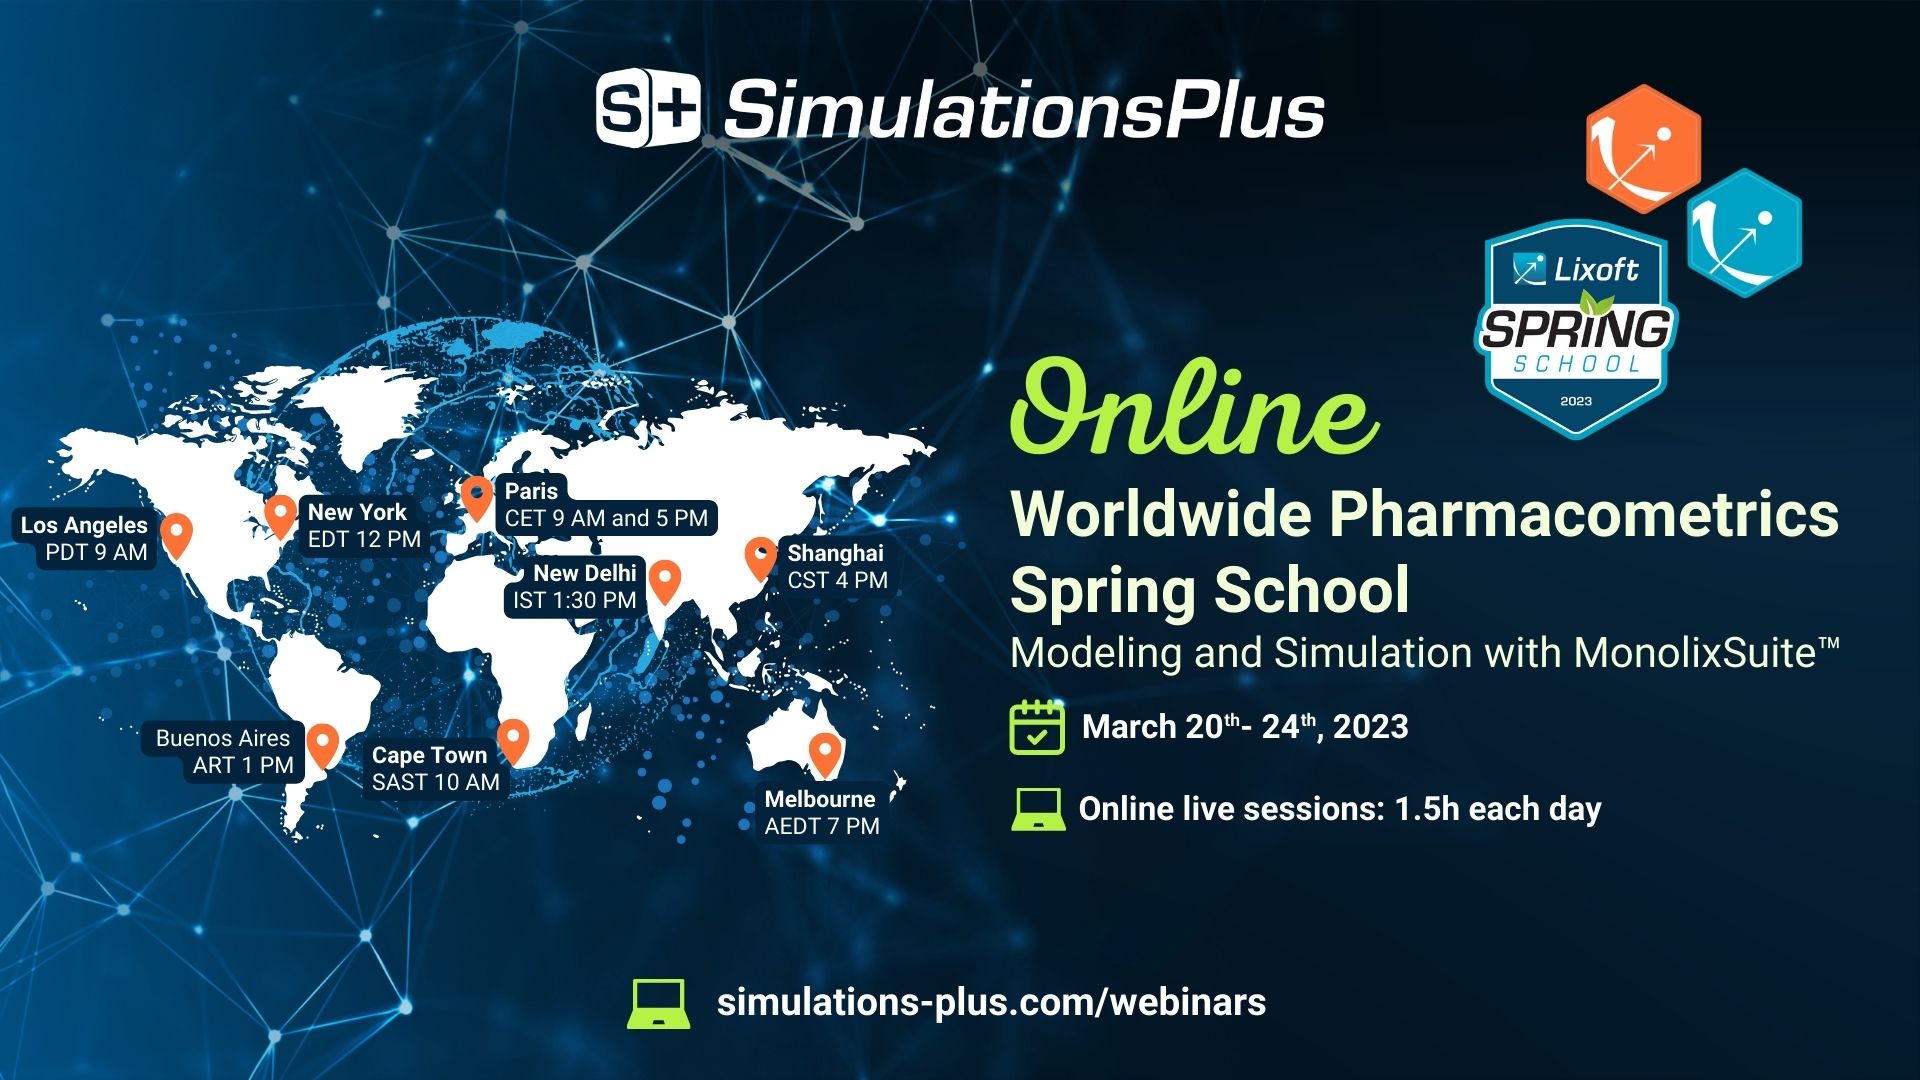 Online Worldwide Pharmacometrics Spring School: Modeling and Simulation with MonolixSuite held on March 20th to 24th 2023. Five online sessions, 1.5h each, repeated twice a day: at 9 AM CET and 5 PM CET. 